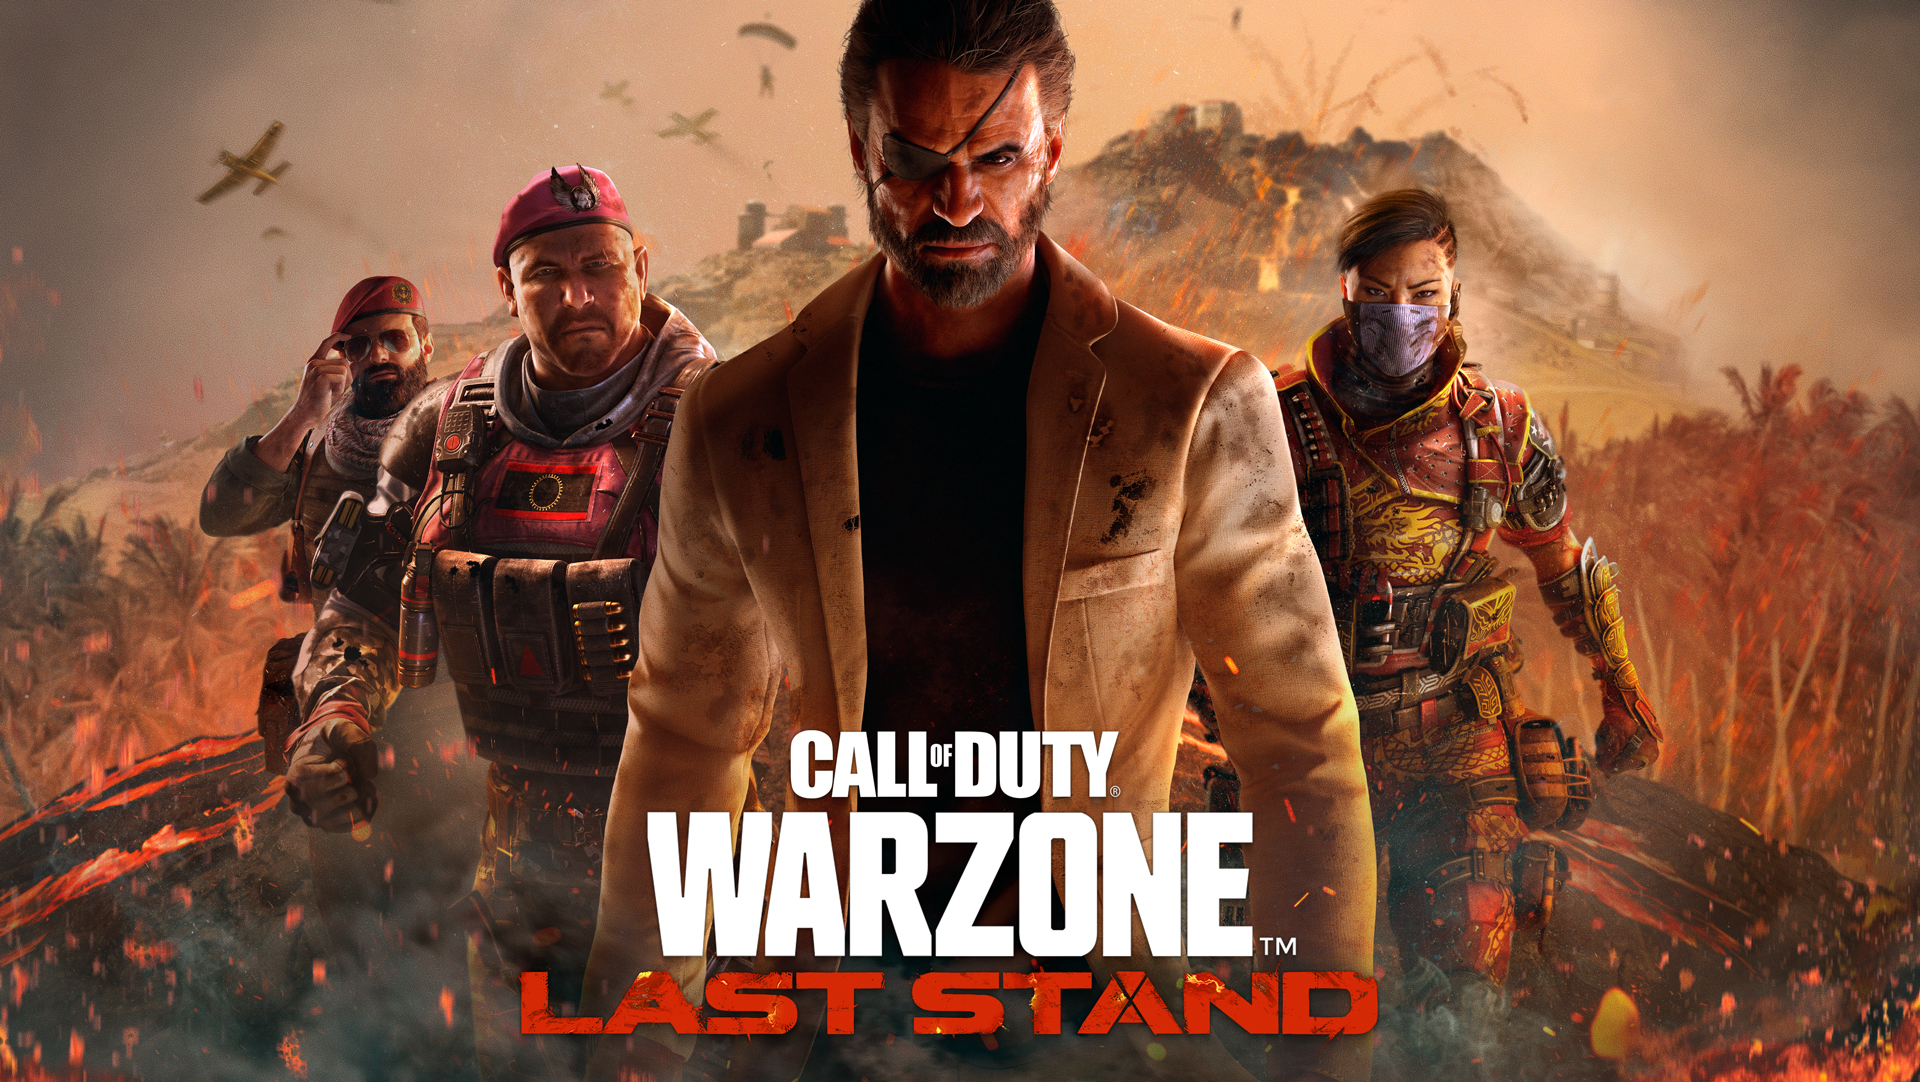 Call of Duty: Warzone Last Stand